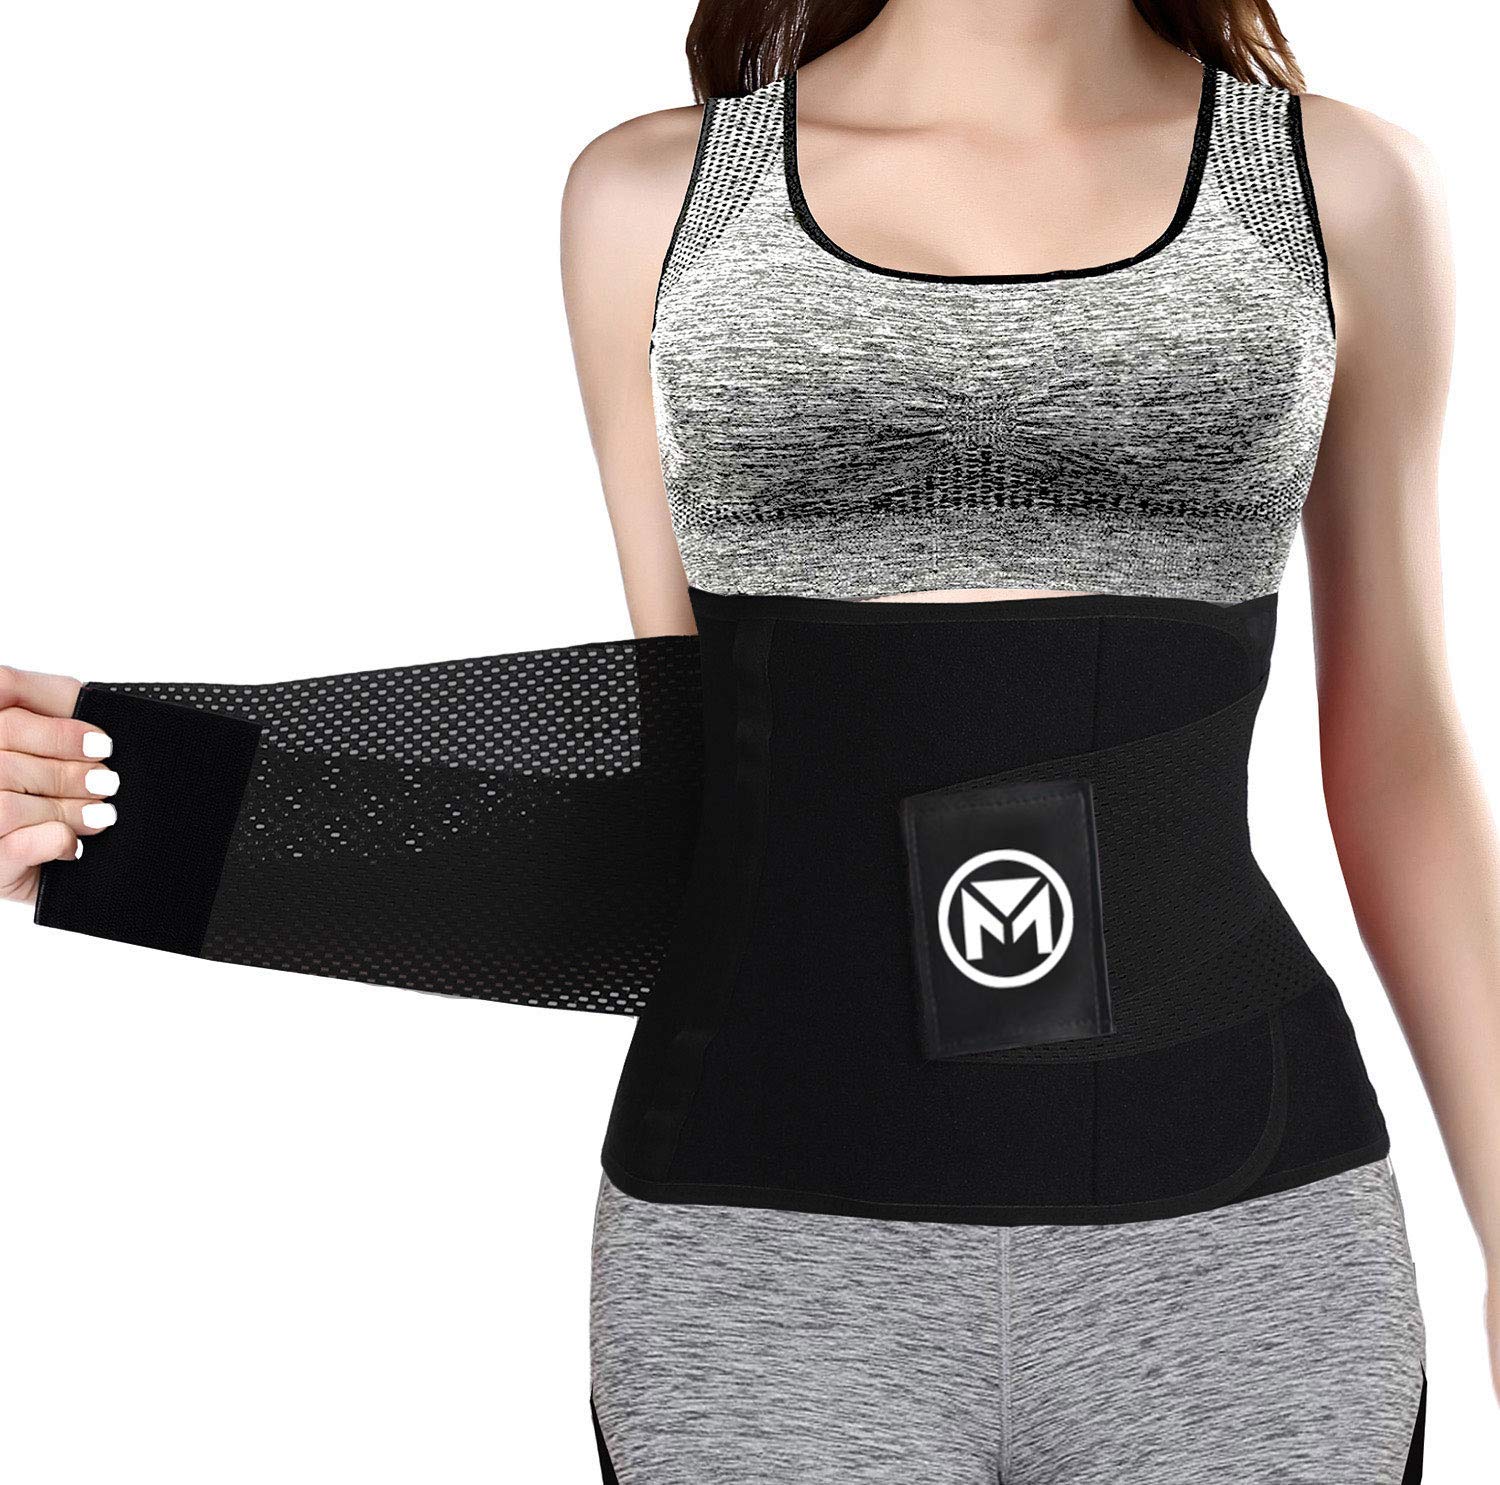 produceren nicotine Kabelbaan Slim For The Summer With The Best Waist Trainer of 2023